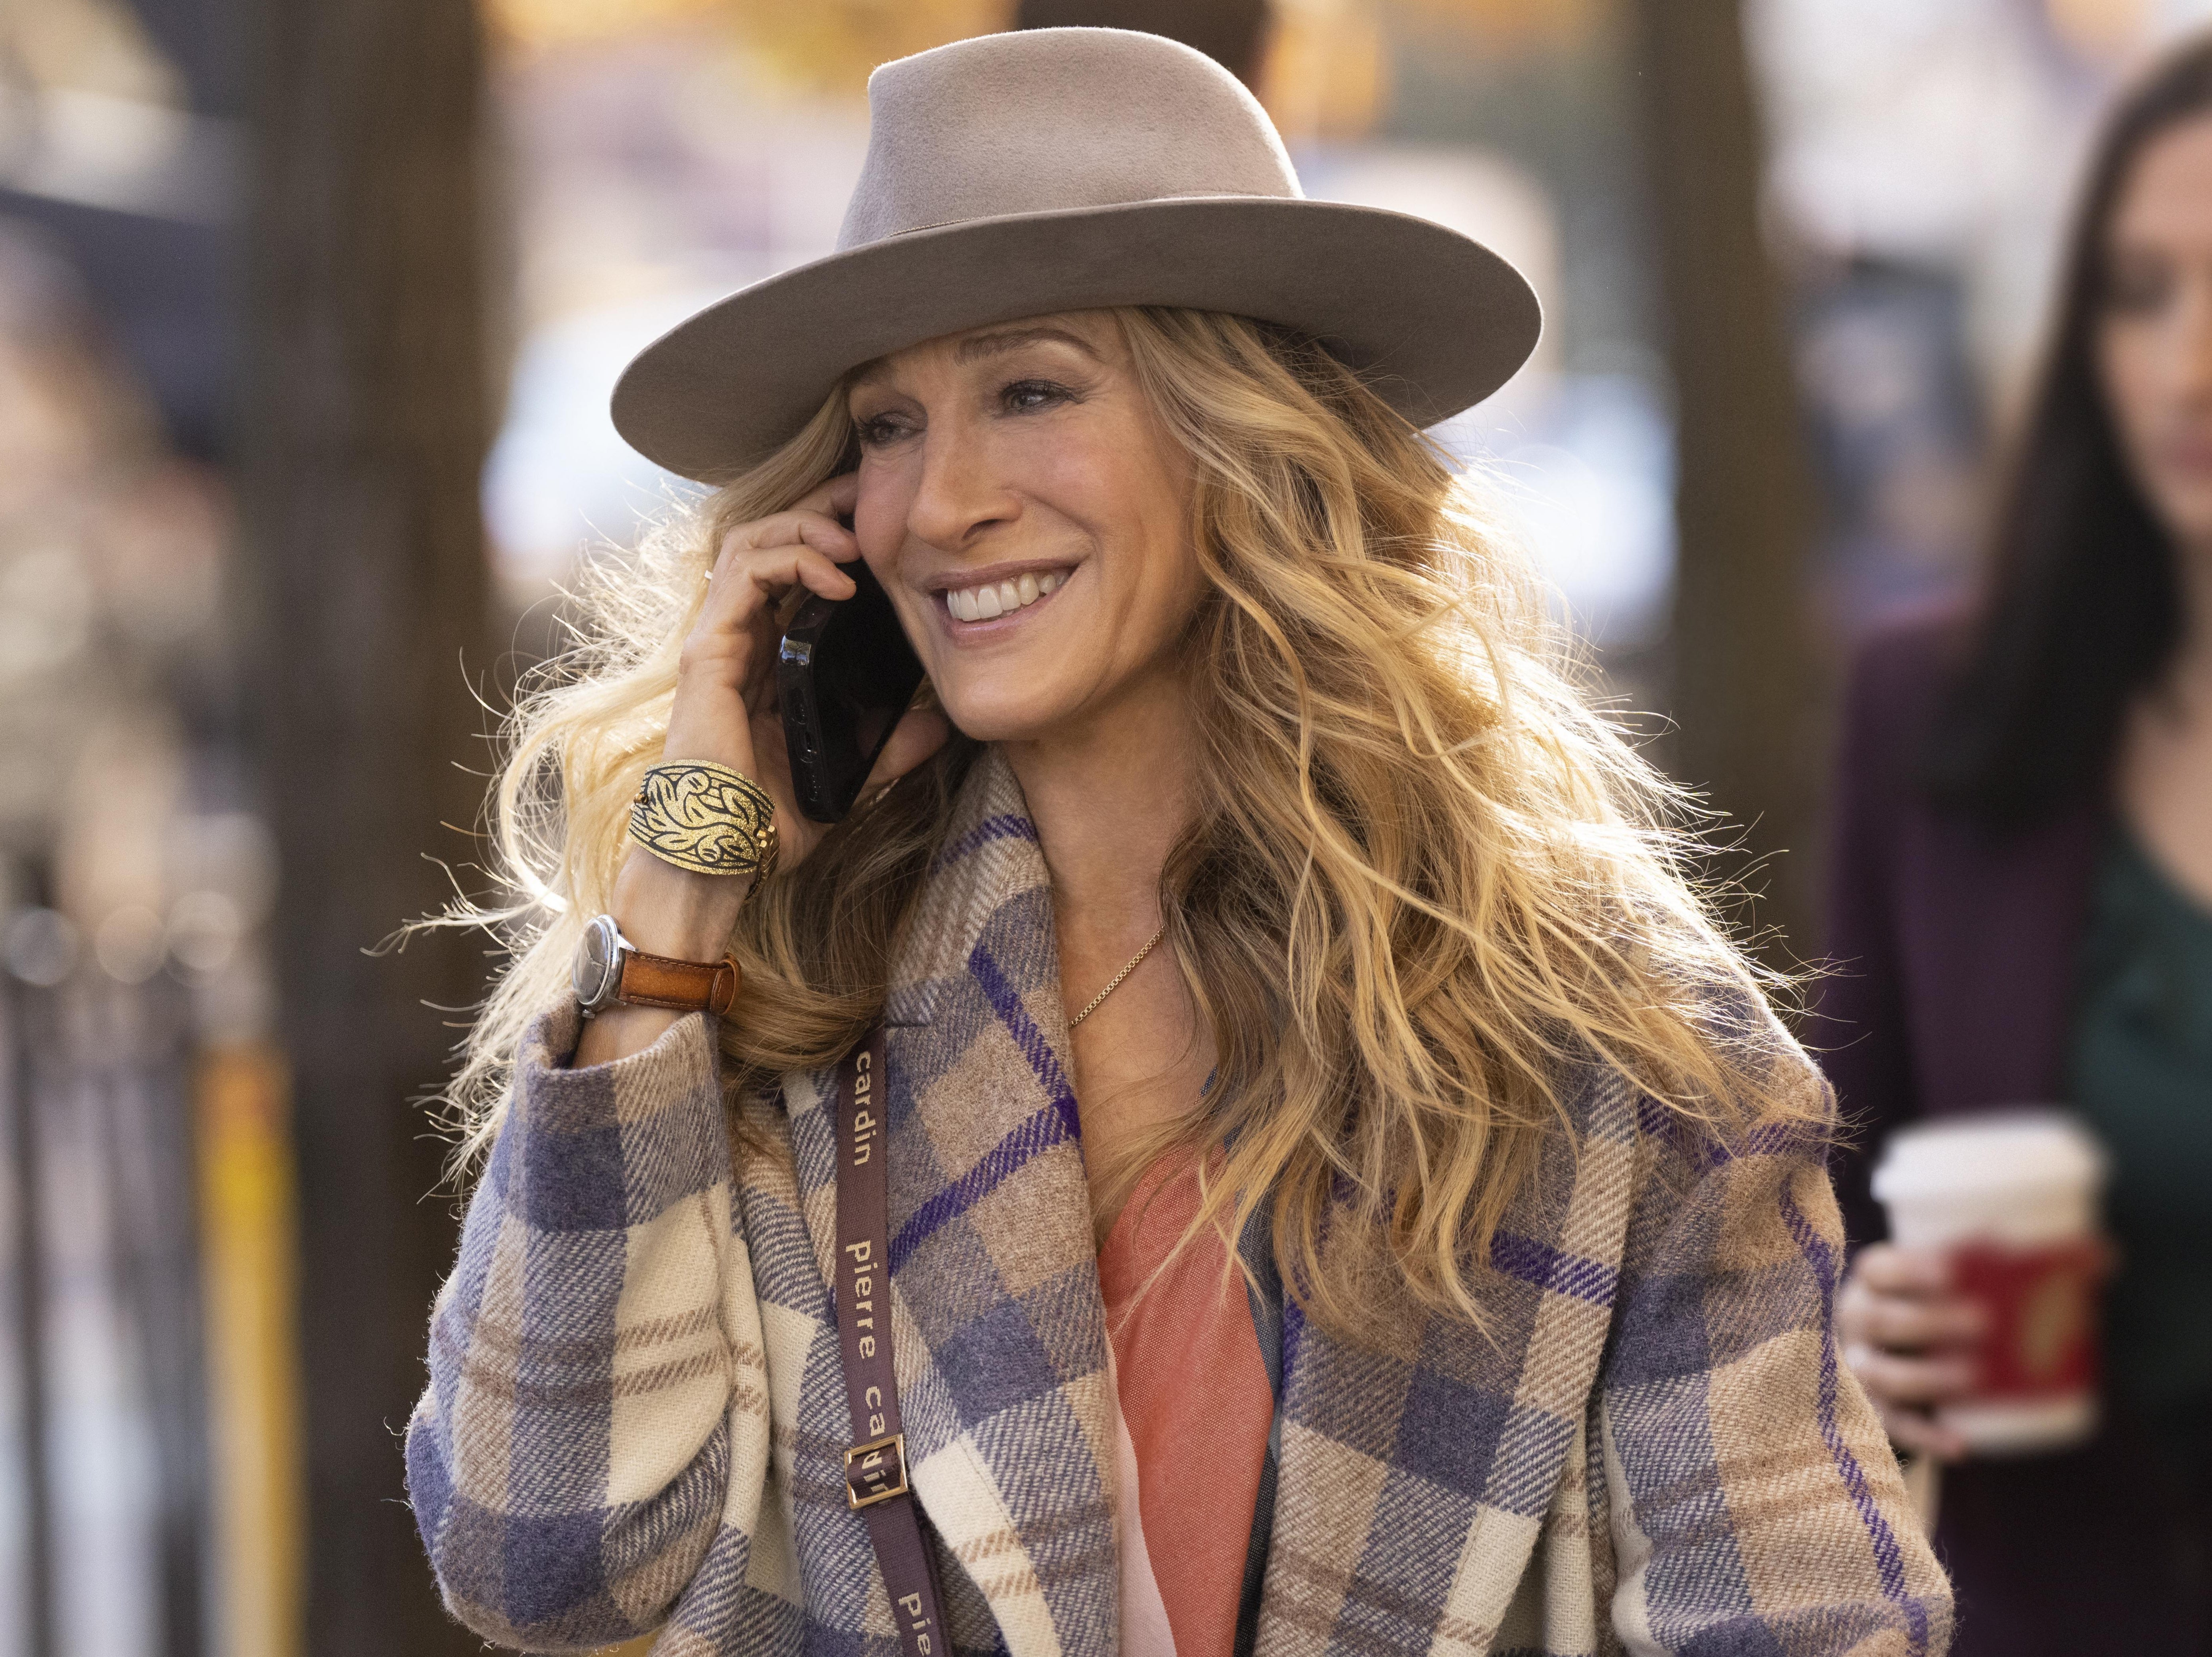 Sarah Jessica Parker’s Carrie, who has cooked salmon a few times, in ‘And Just Like That’